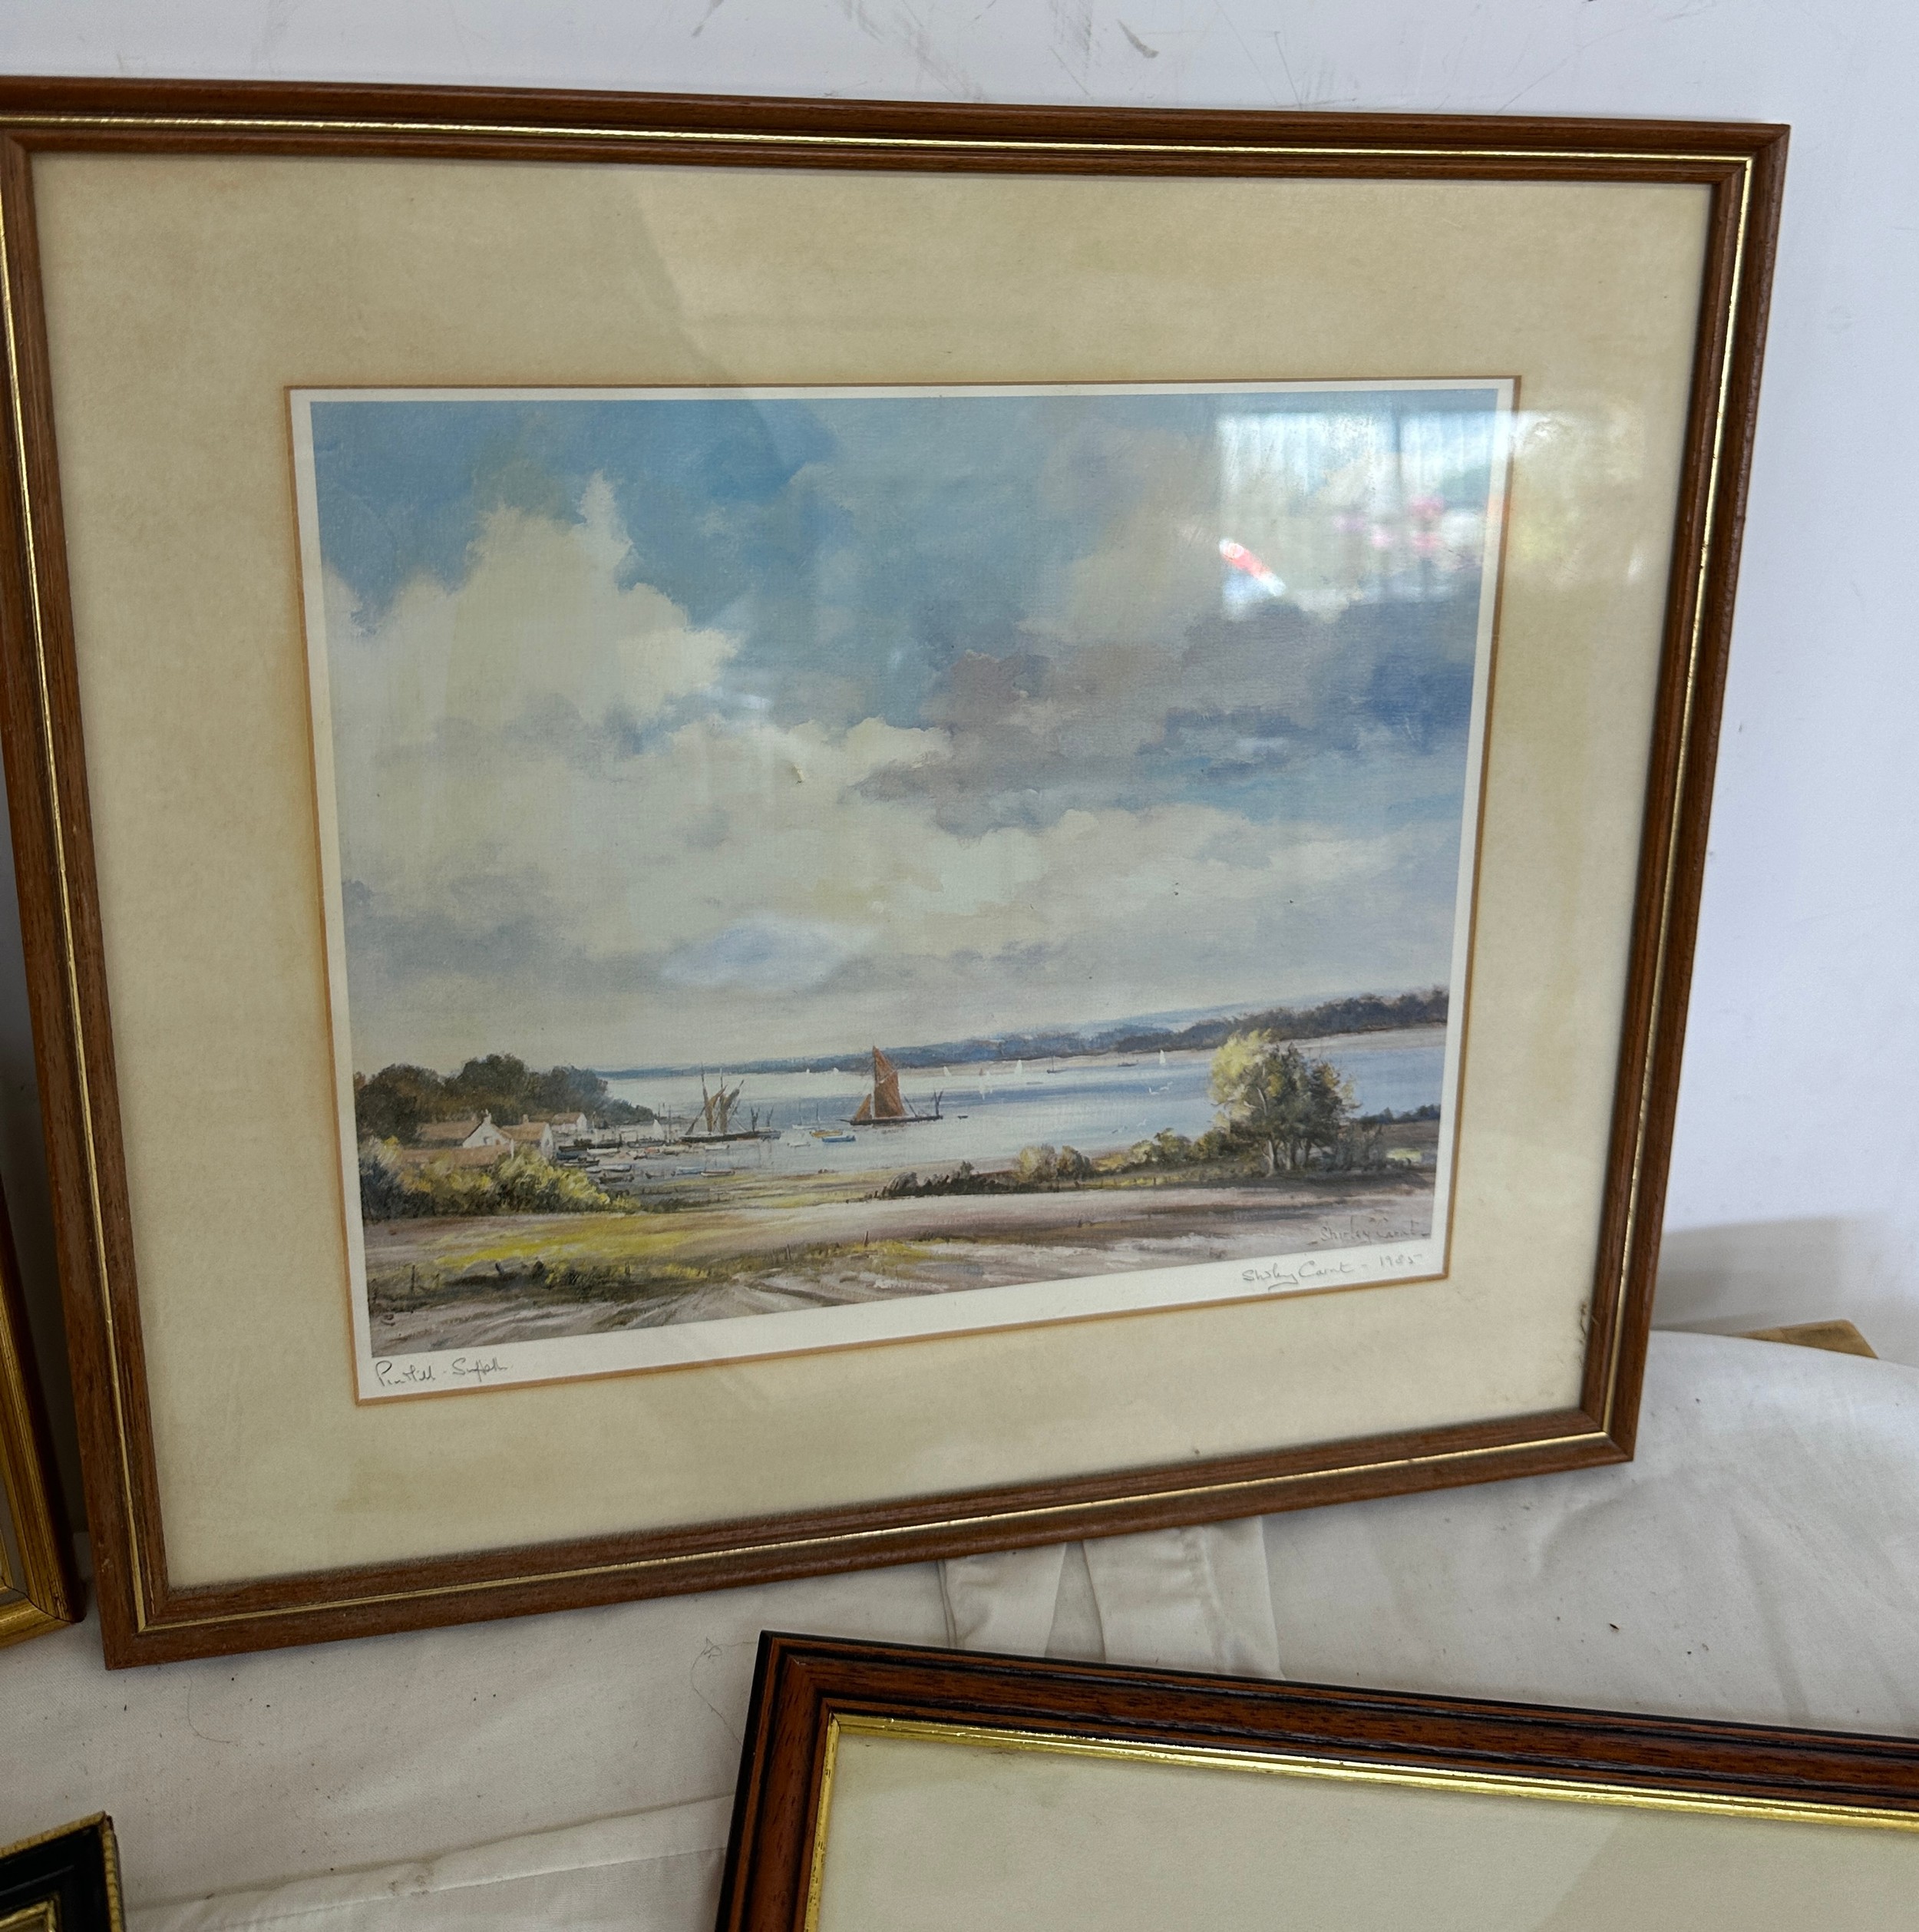 Framed prints by Shirley Carnt, Signed watercolour by Melvyn R J Brinkley, Watercolour by John - Image 3 of 8